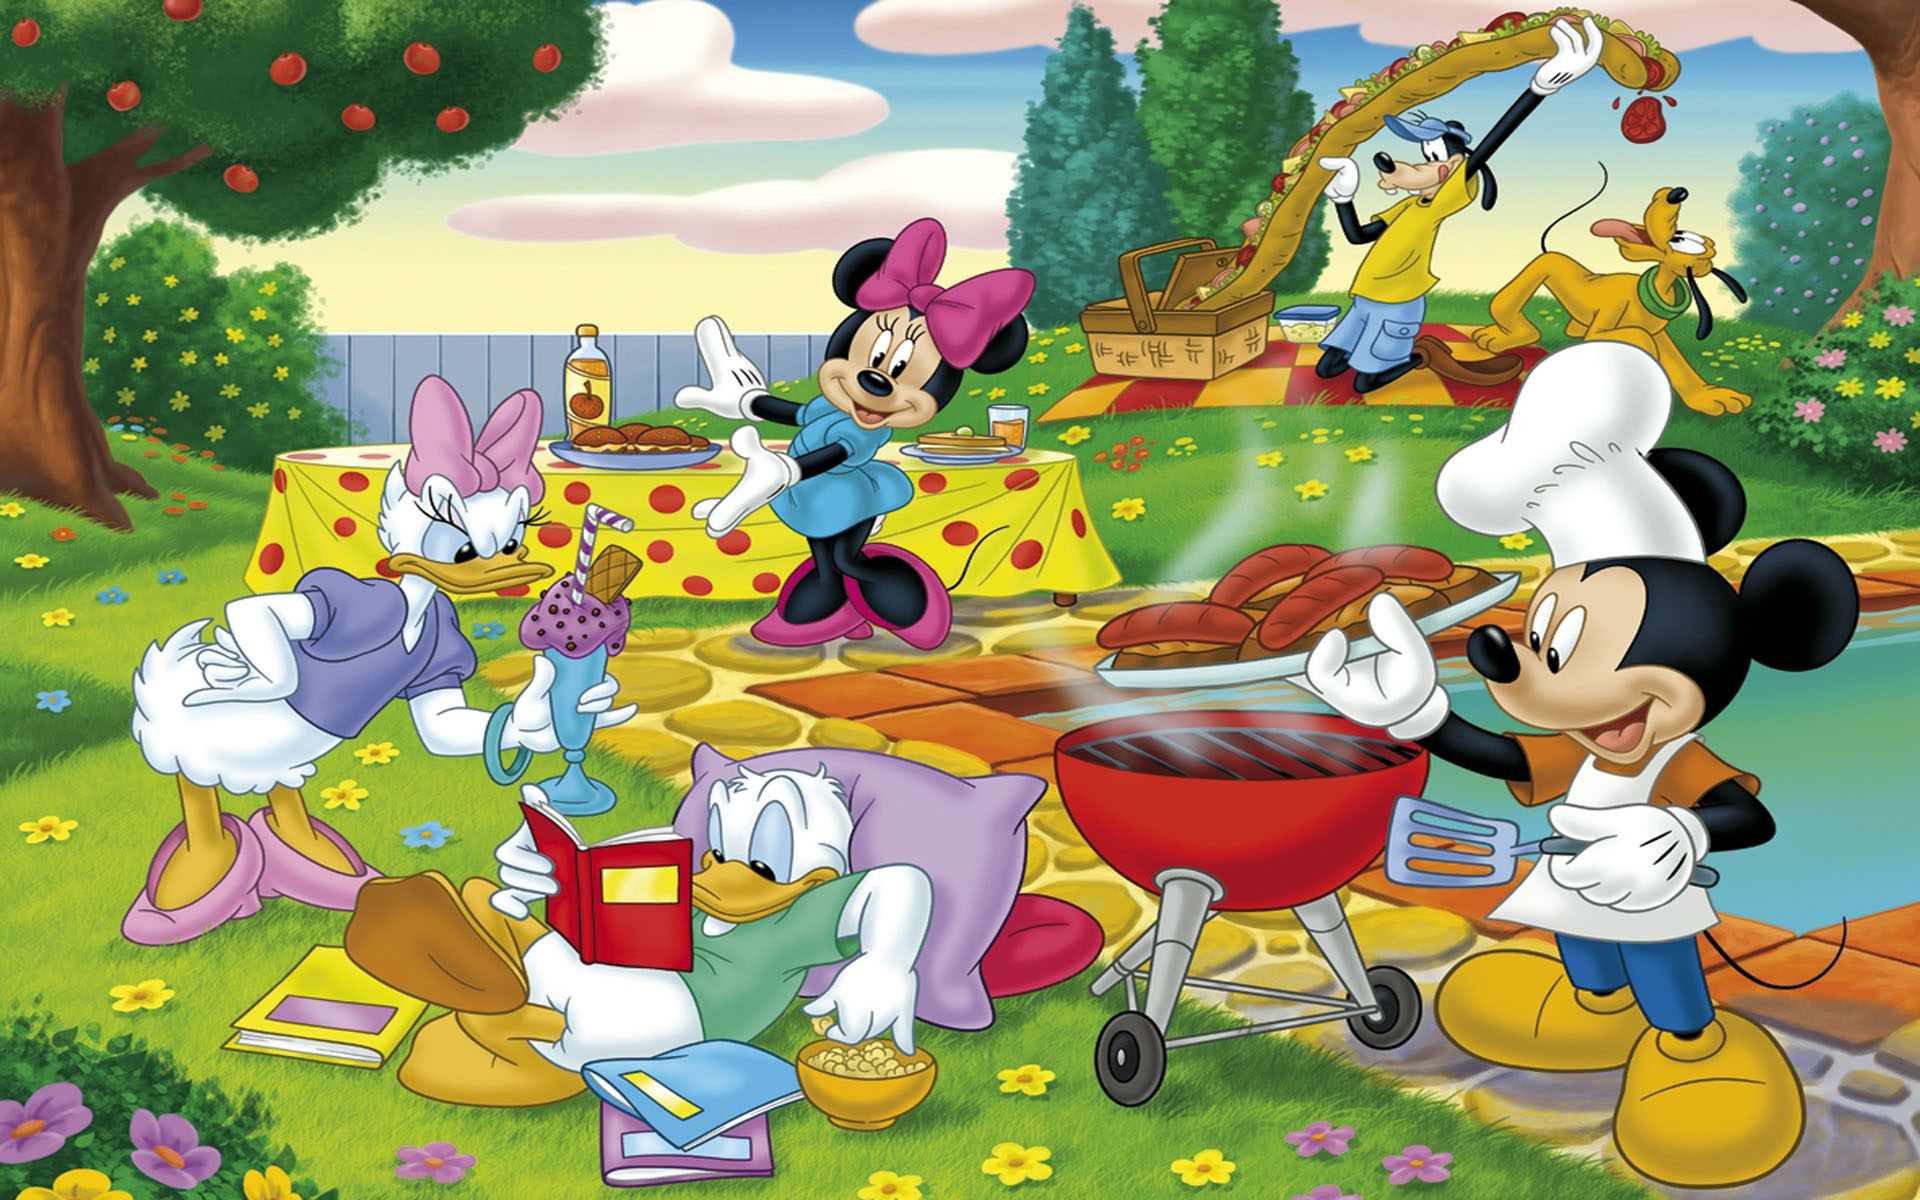 Picnic Outing In Nature Cartoon Mickey And Minnie Mouse Donald Duck And Daisy Wallpaper HD 1920x1200, Wallpaper13.com